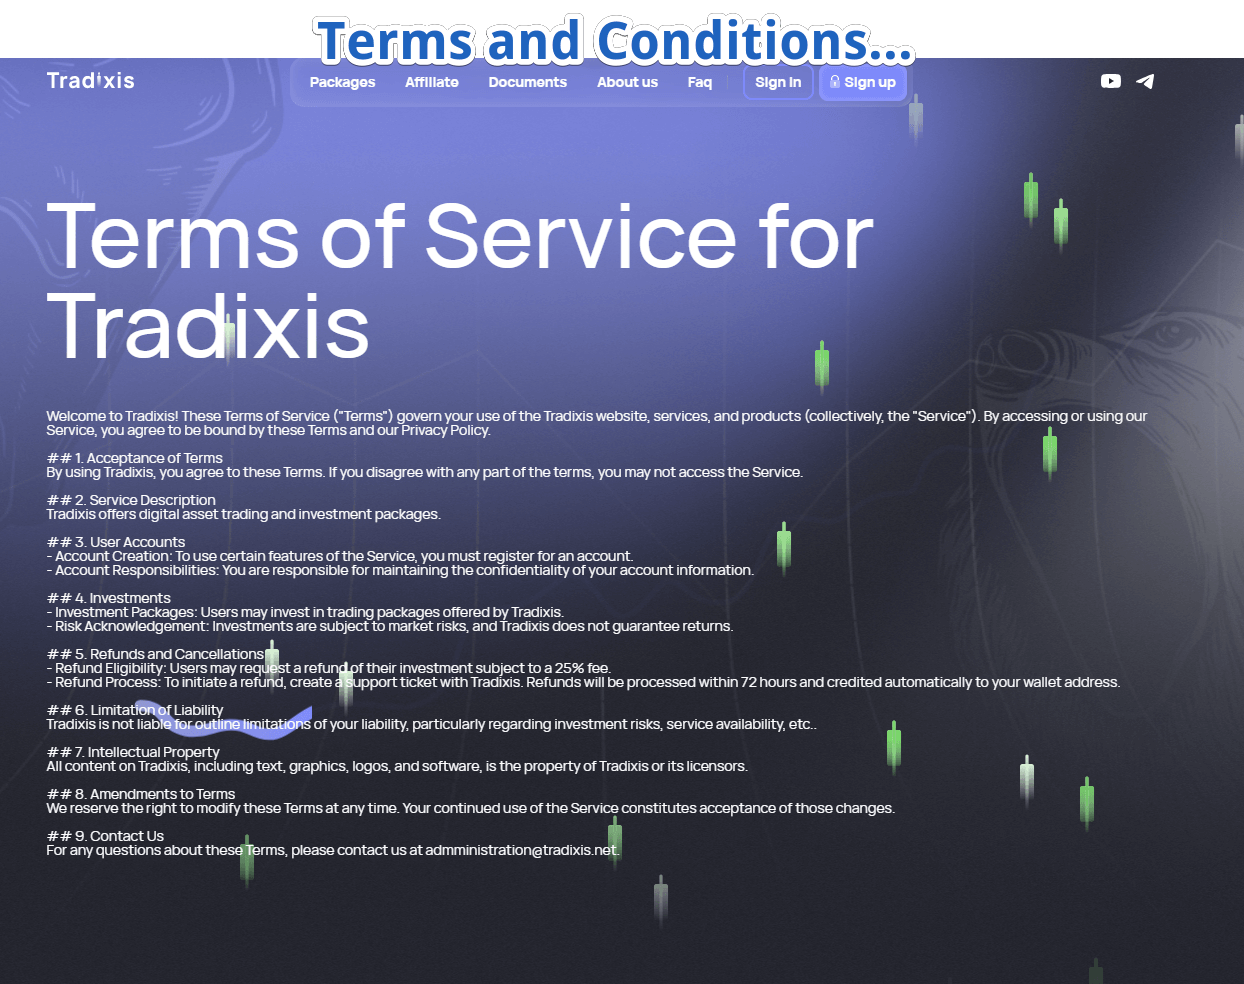 Tradixis Affiliate - Terms and Conditions